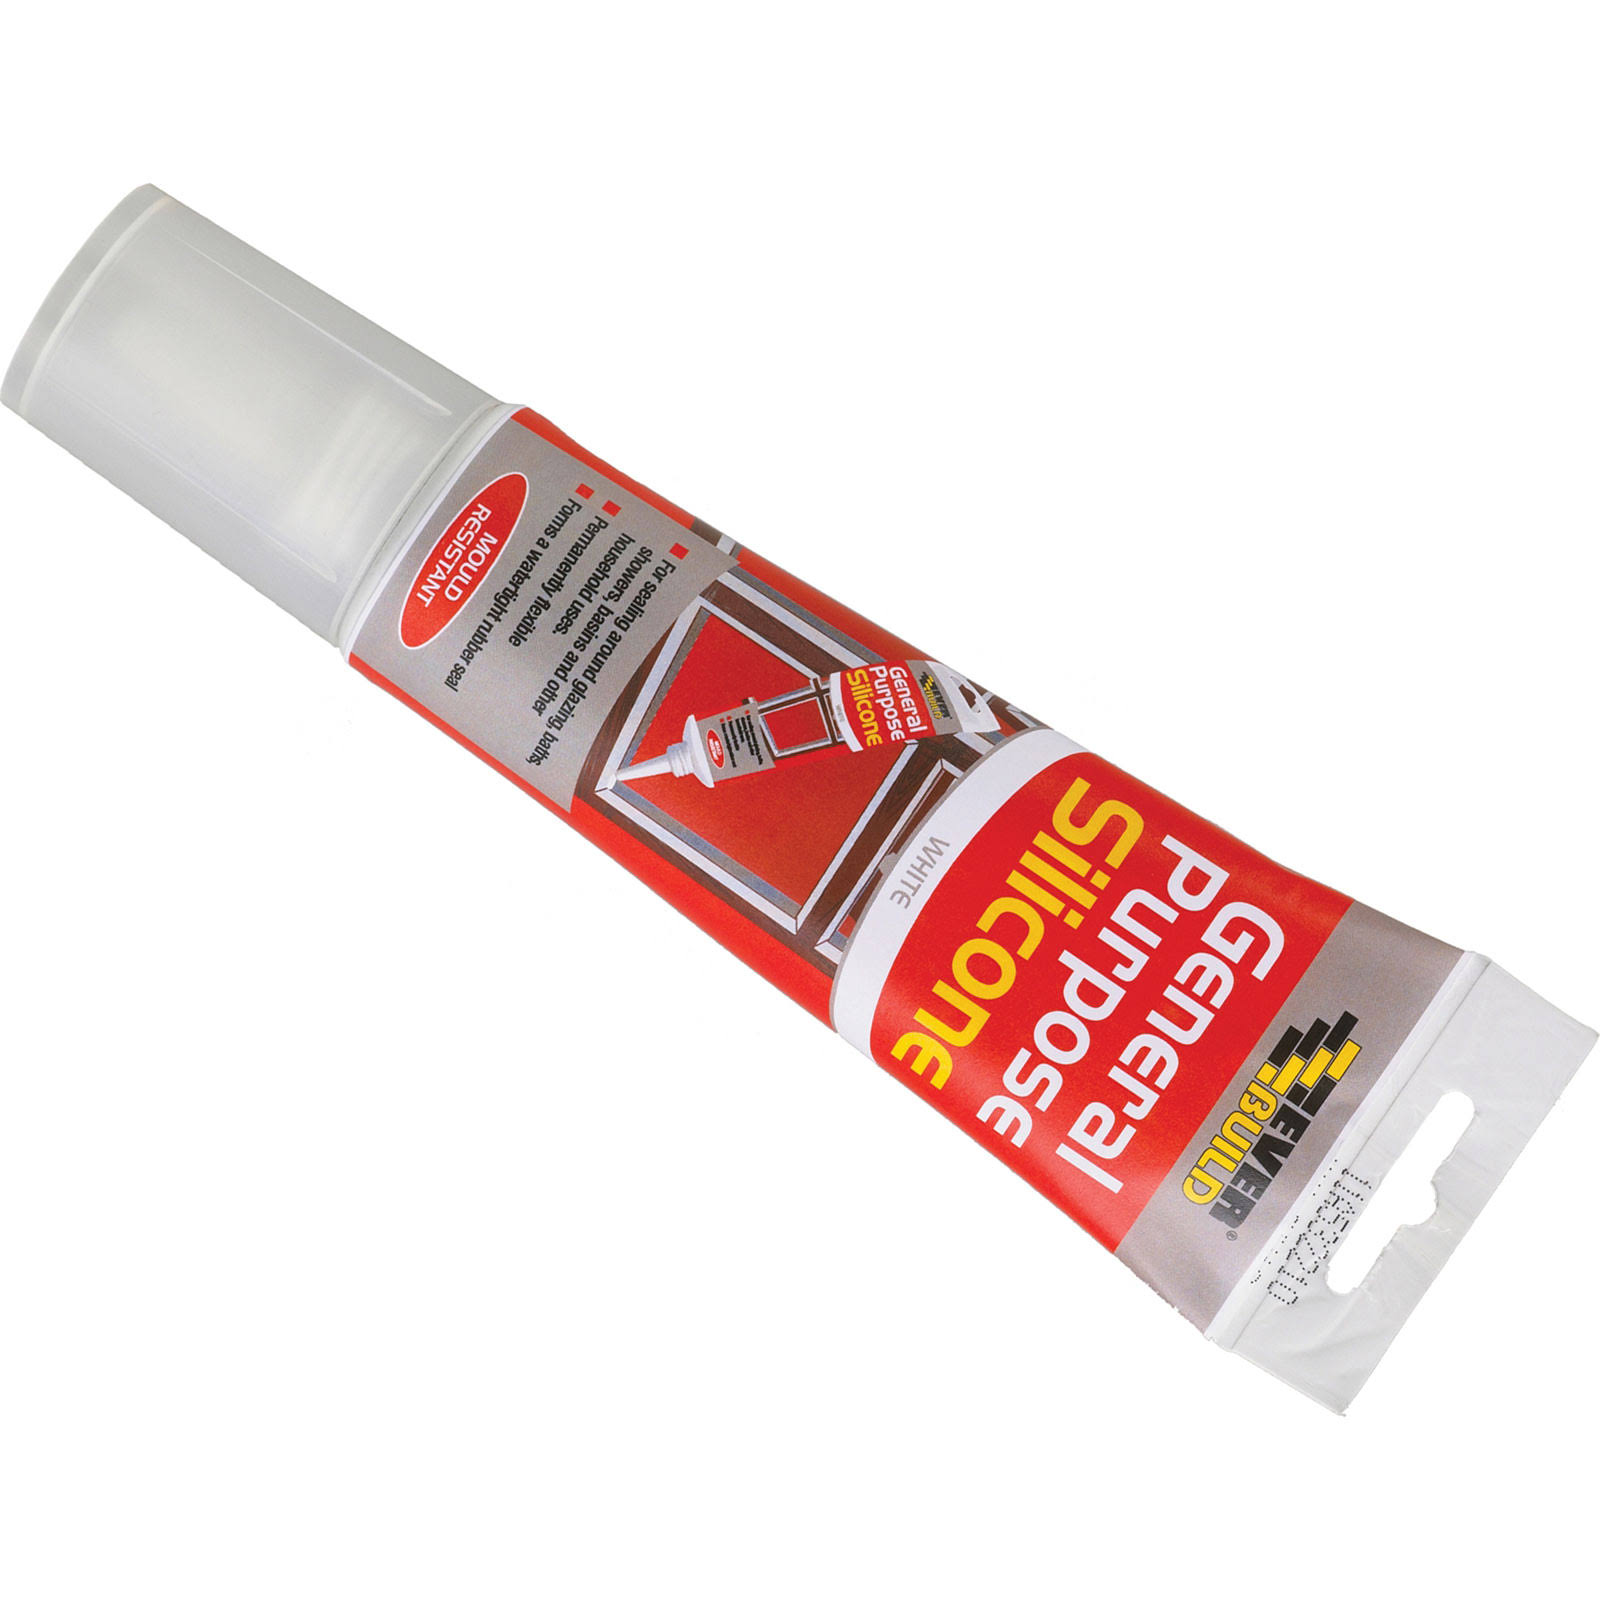 Everbuild General Purpose Easi Squeeze Silicone Sealant - Clear